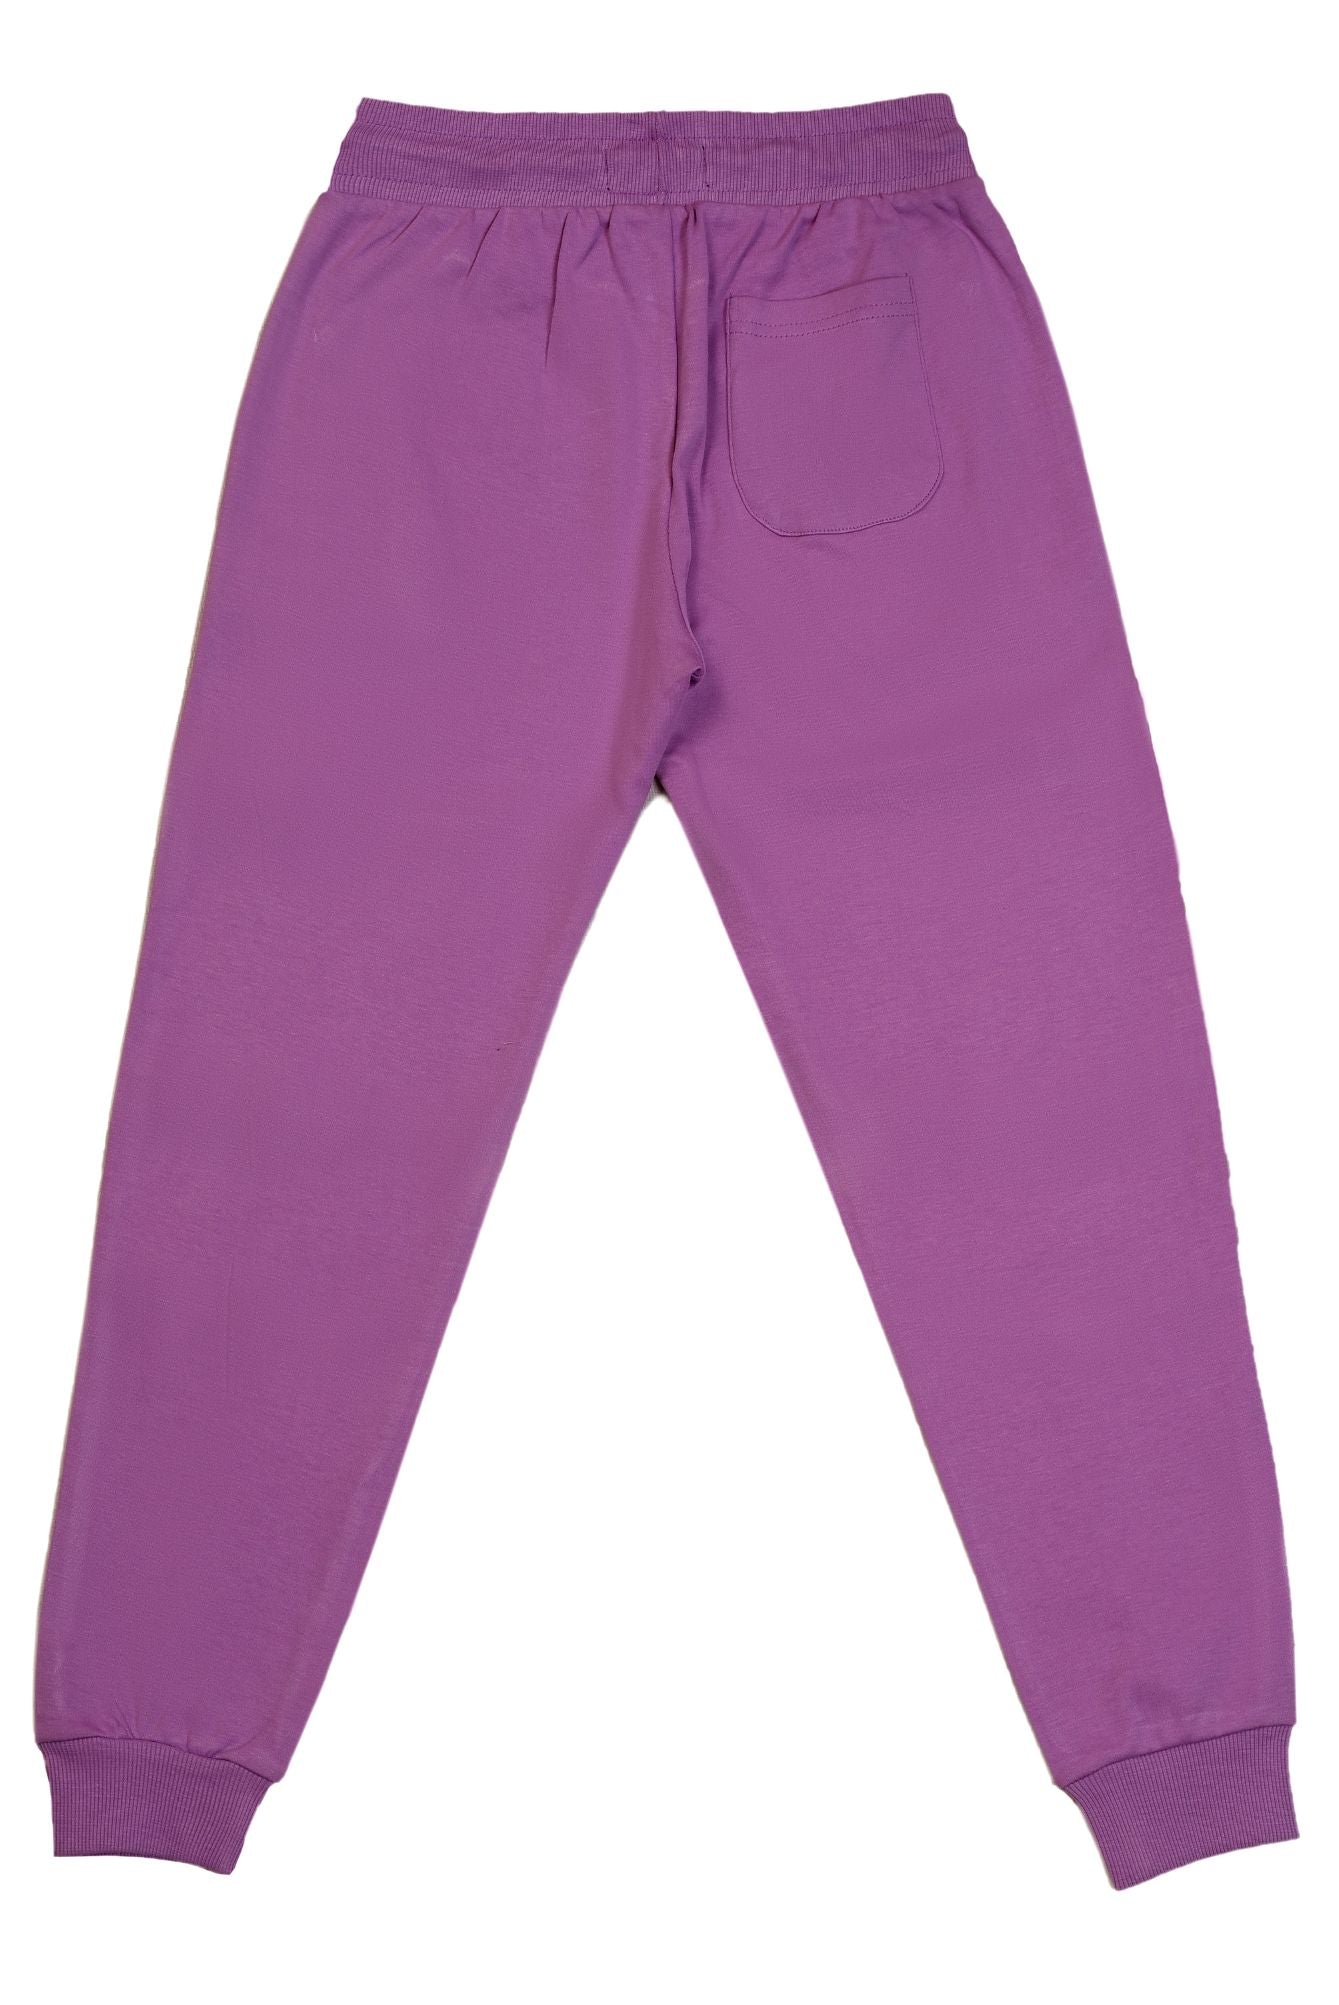 KDS-GC-12416 PULL ON TROUSER LILAC